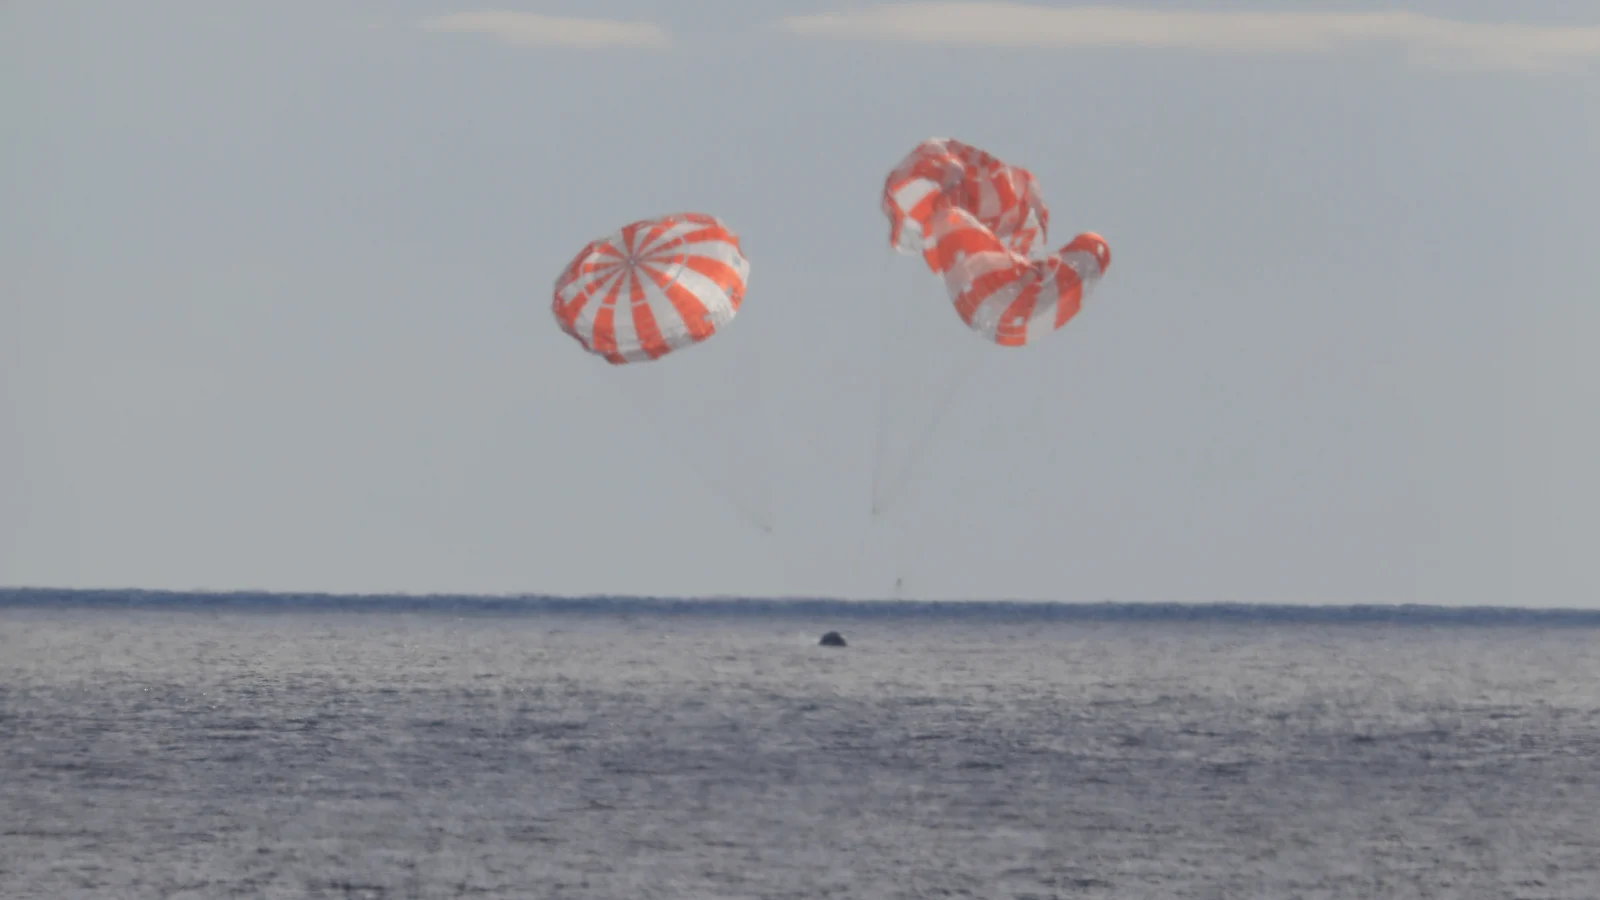 NASA Orion splashes down after amazing trip to the Moon and back